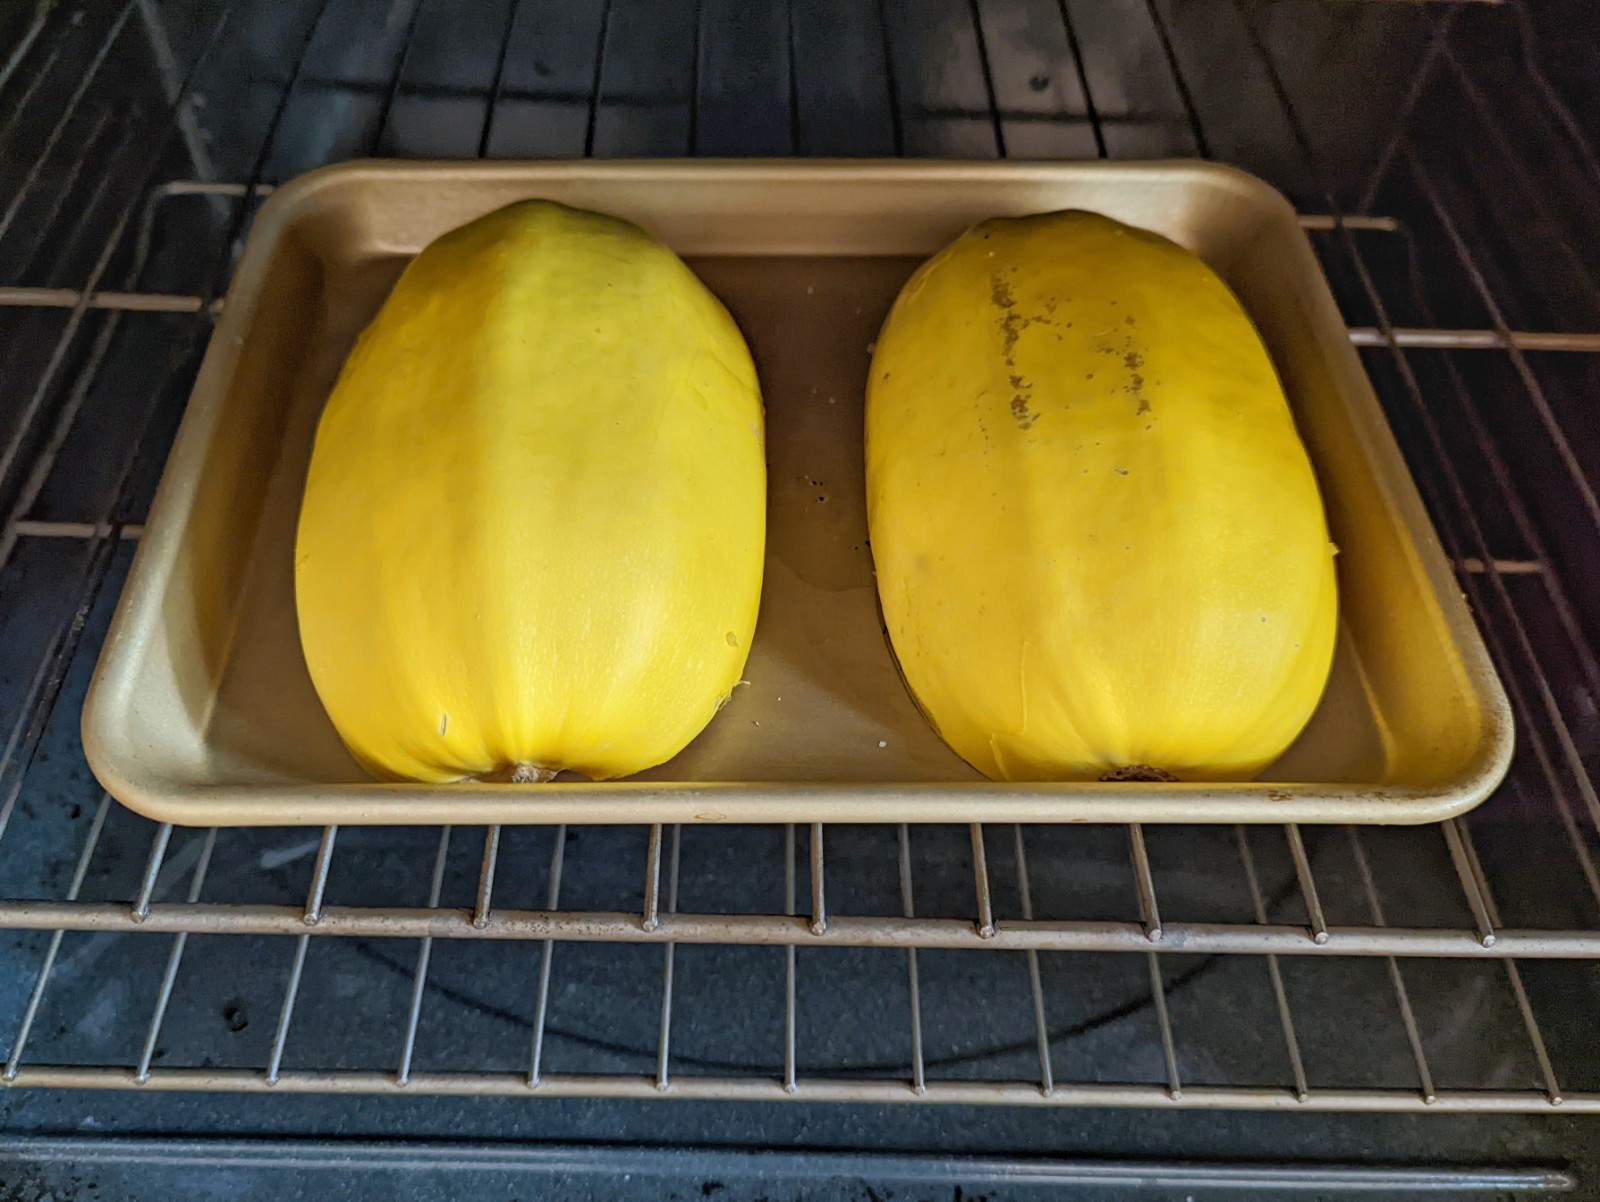 Two halves of the spaghetti squash baking in the oven.